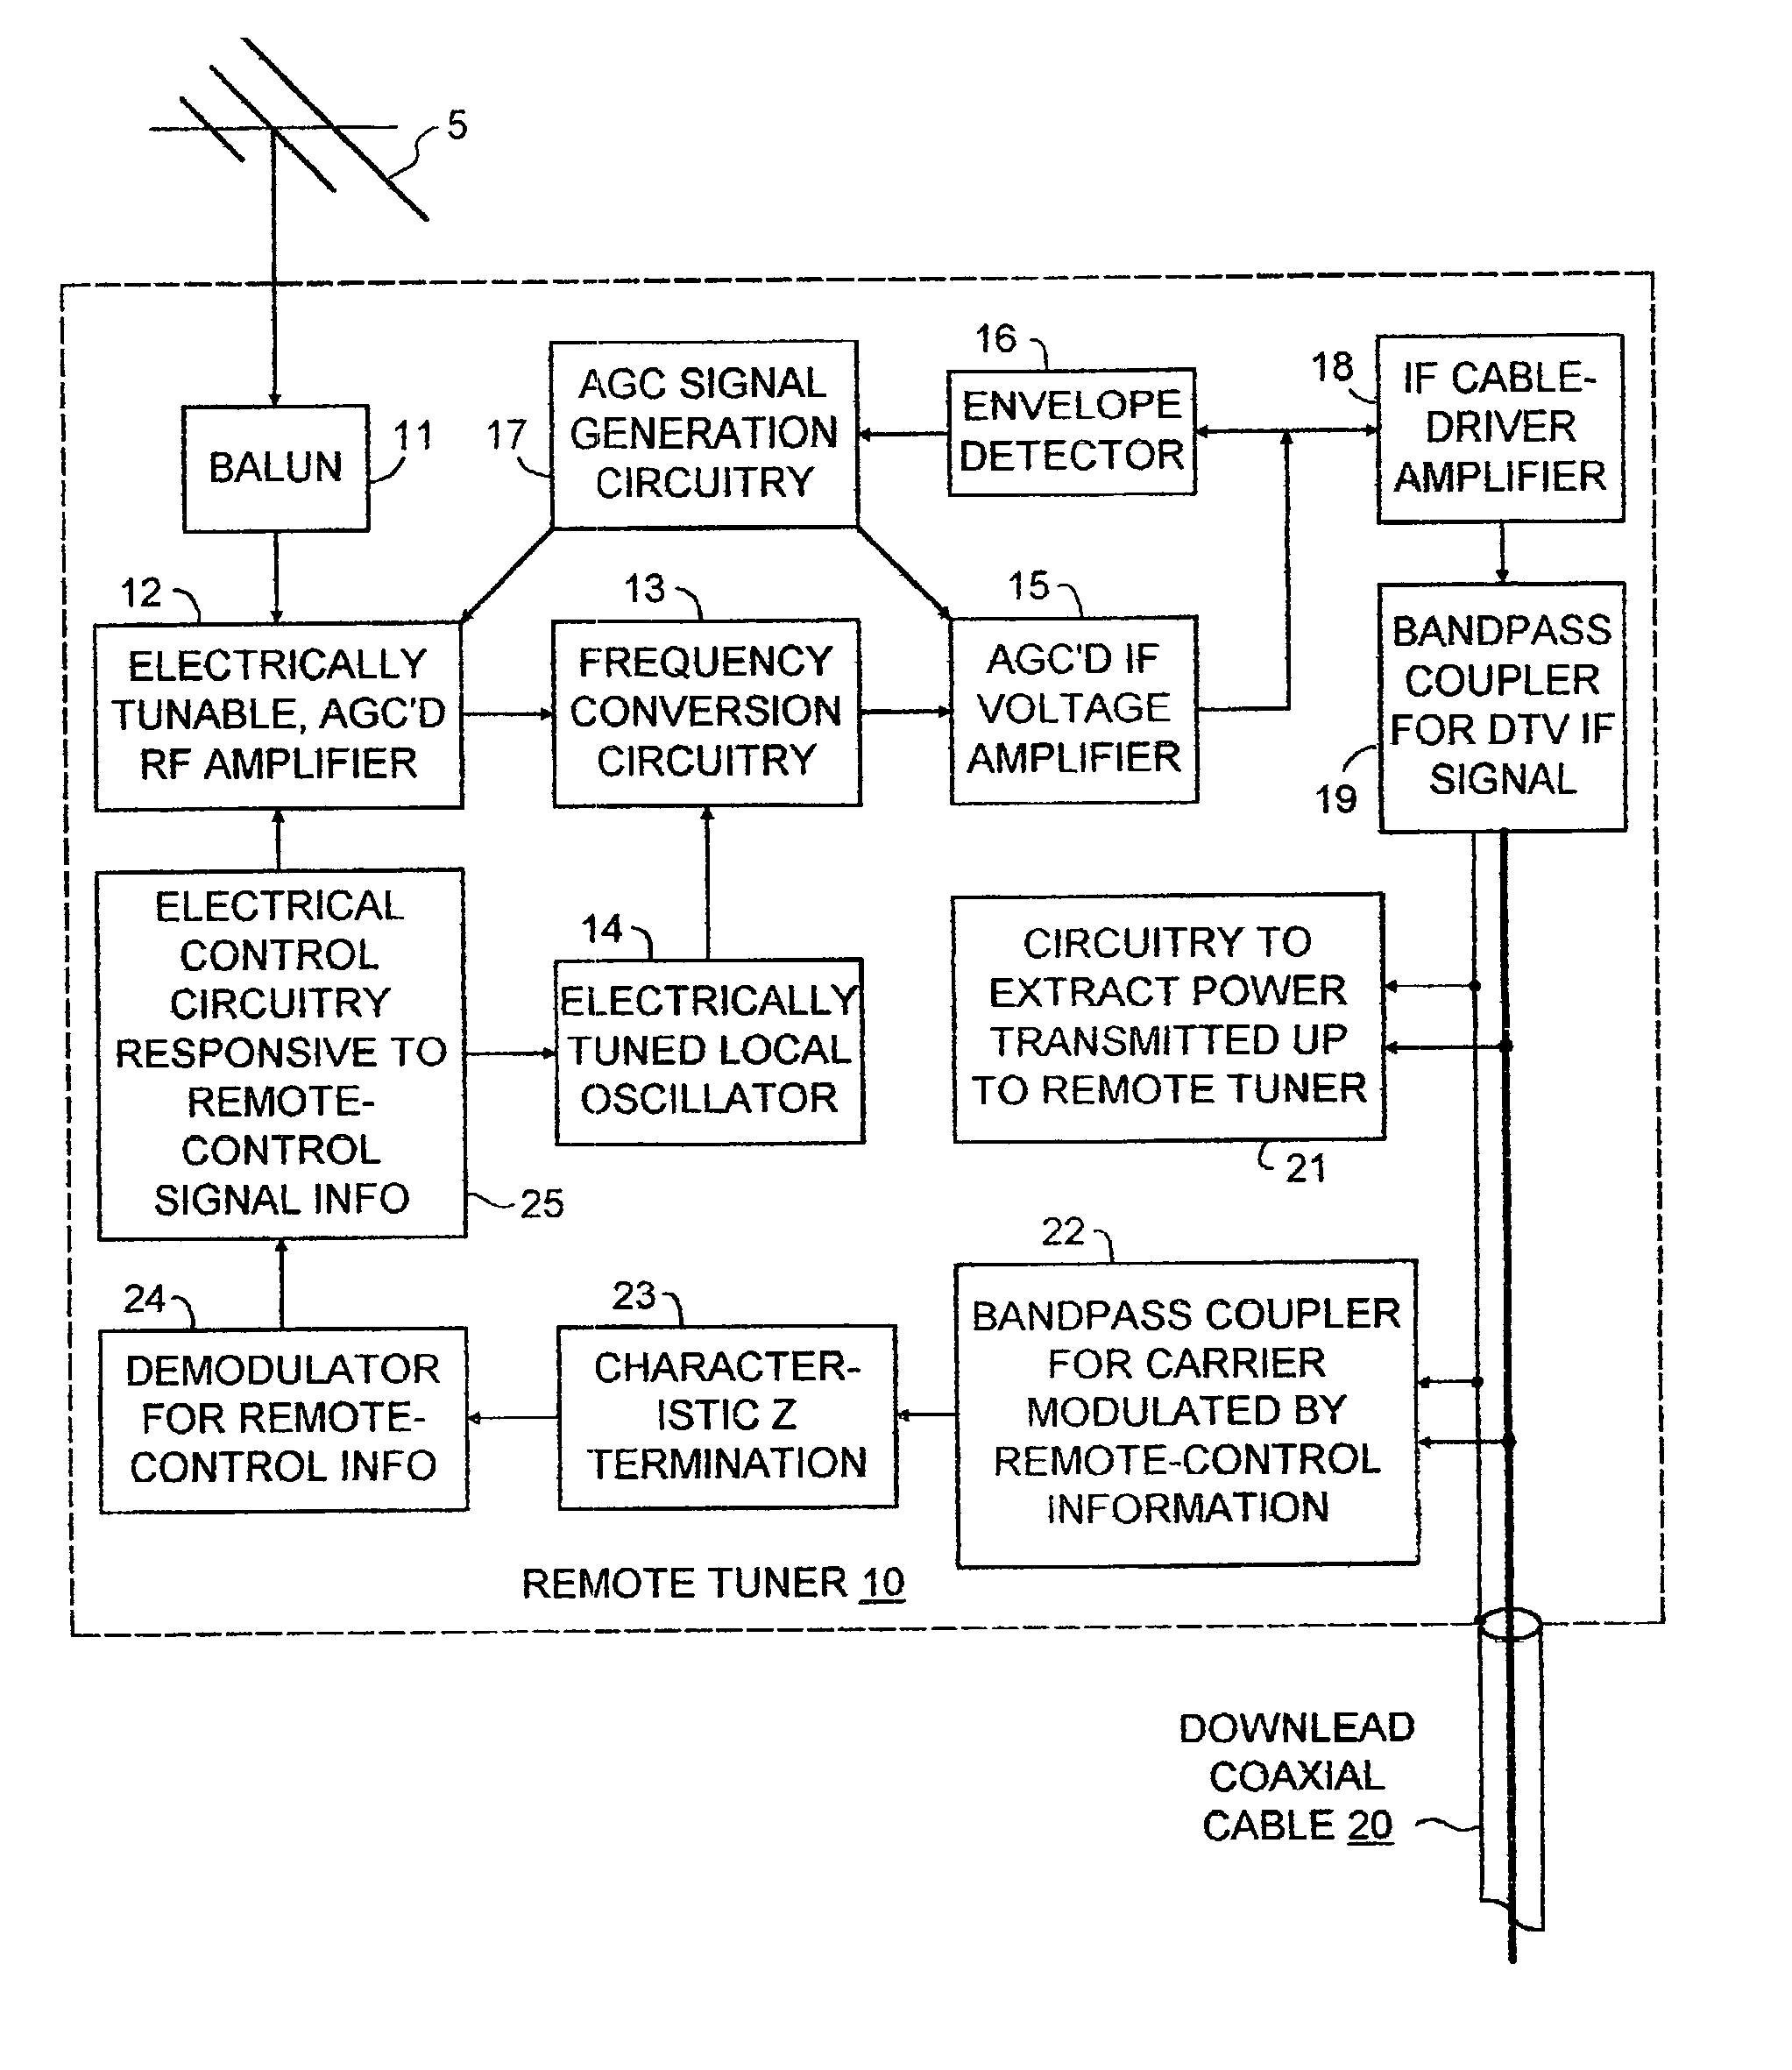 Digital television receiver with remote tuner for driving transmission line with intermediate-frequency signal